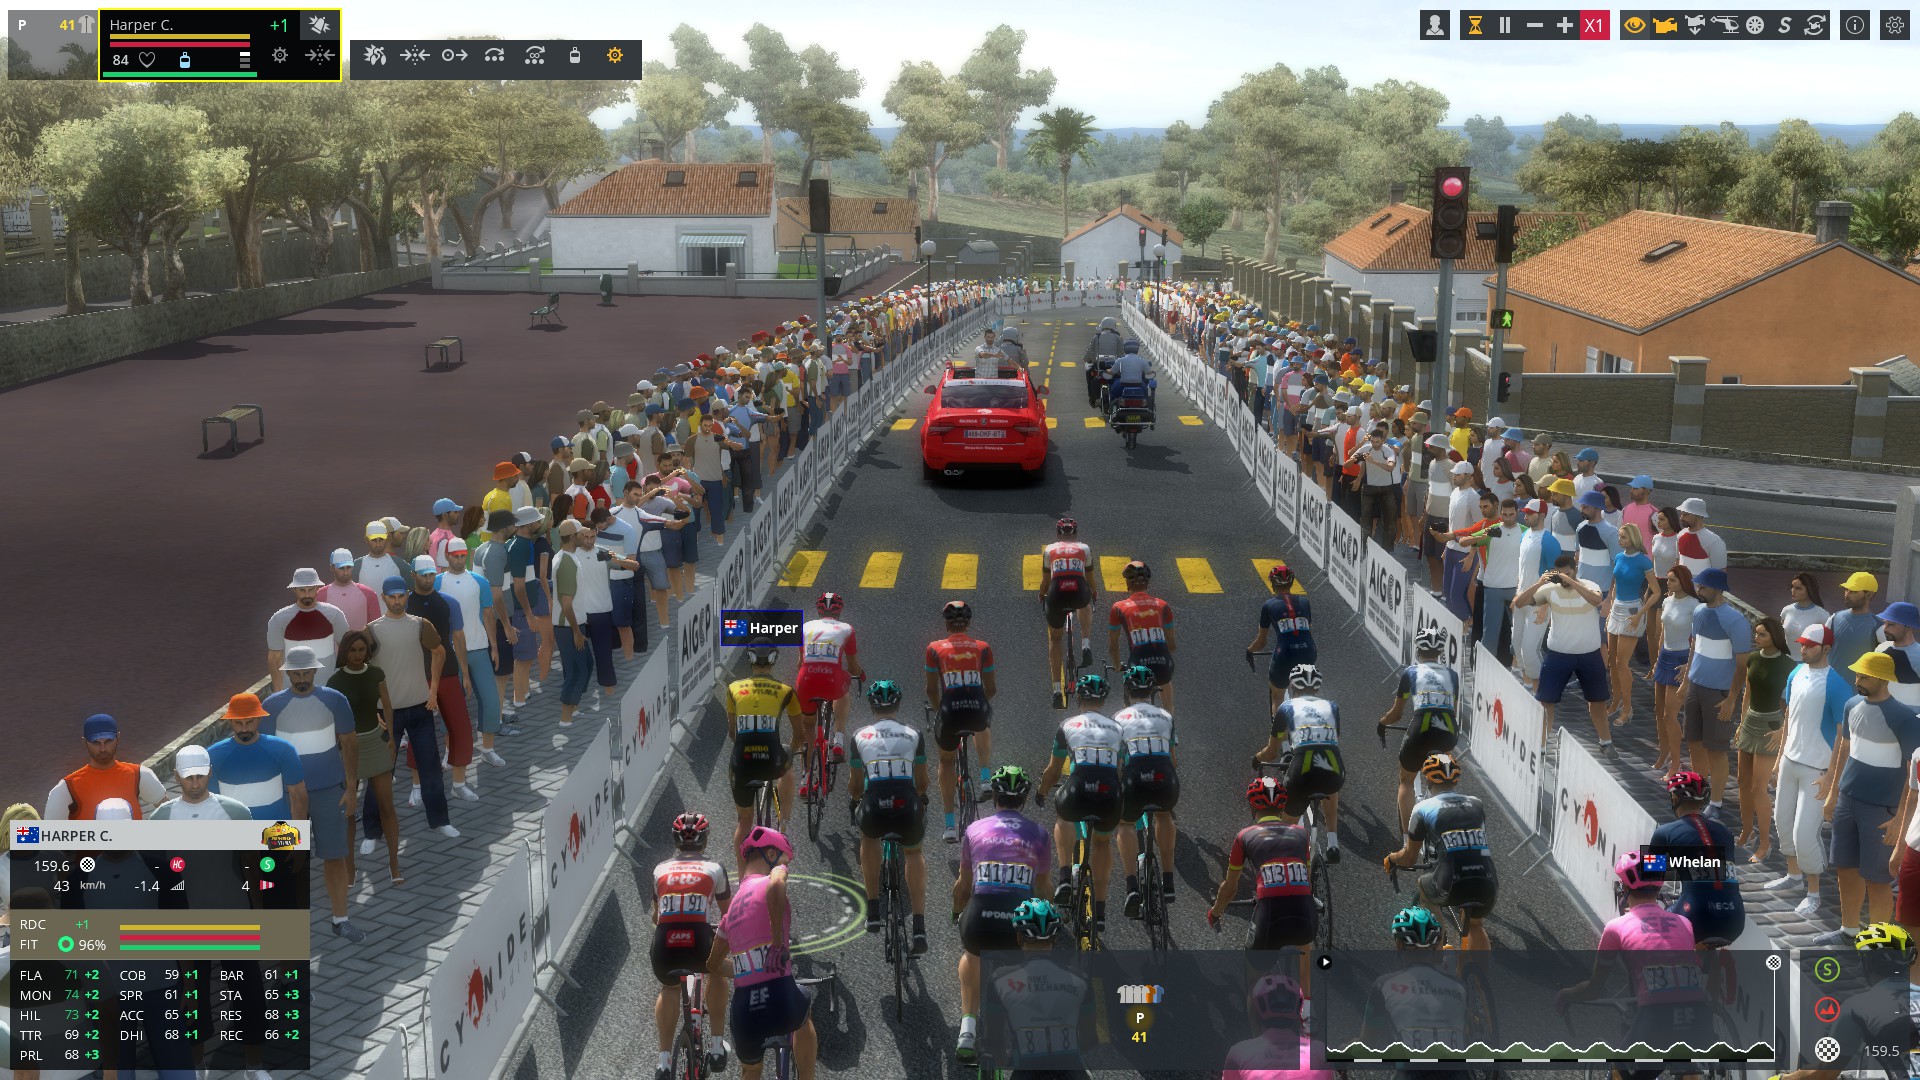 Pro Cycling Manager 2021 Game! - Pro Cyclist #1 